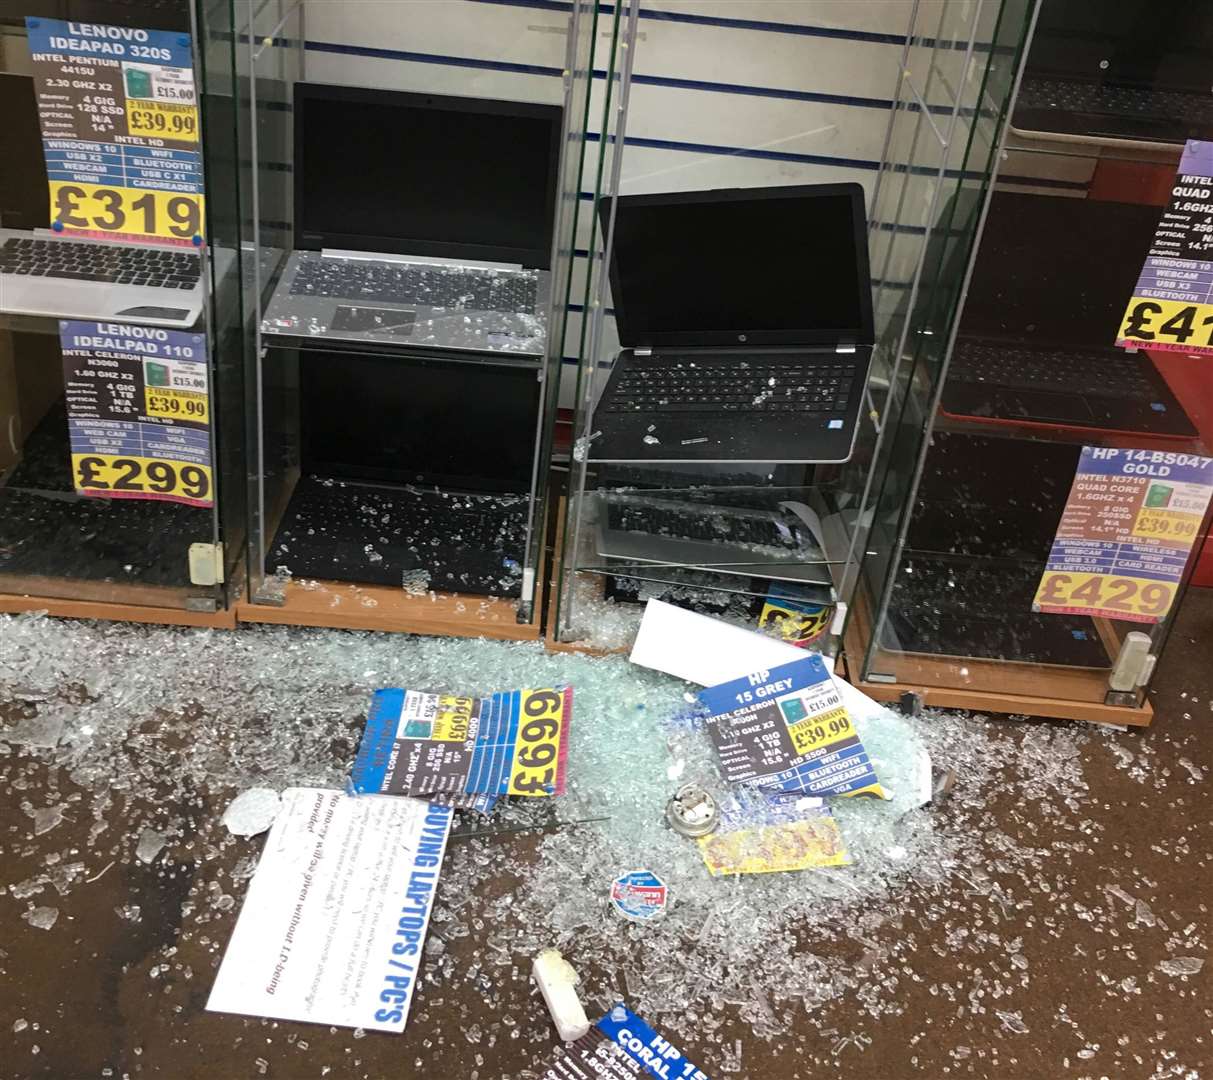 Police are continuing their investigation after Diskworld computer store in Dartford was targeted (14893744)